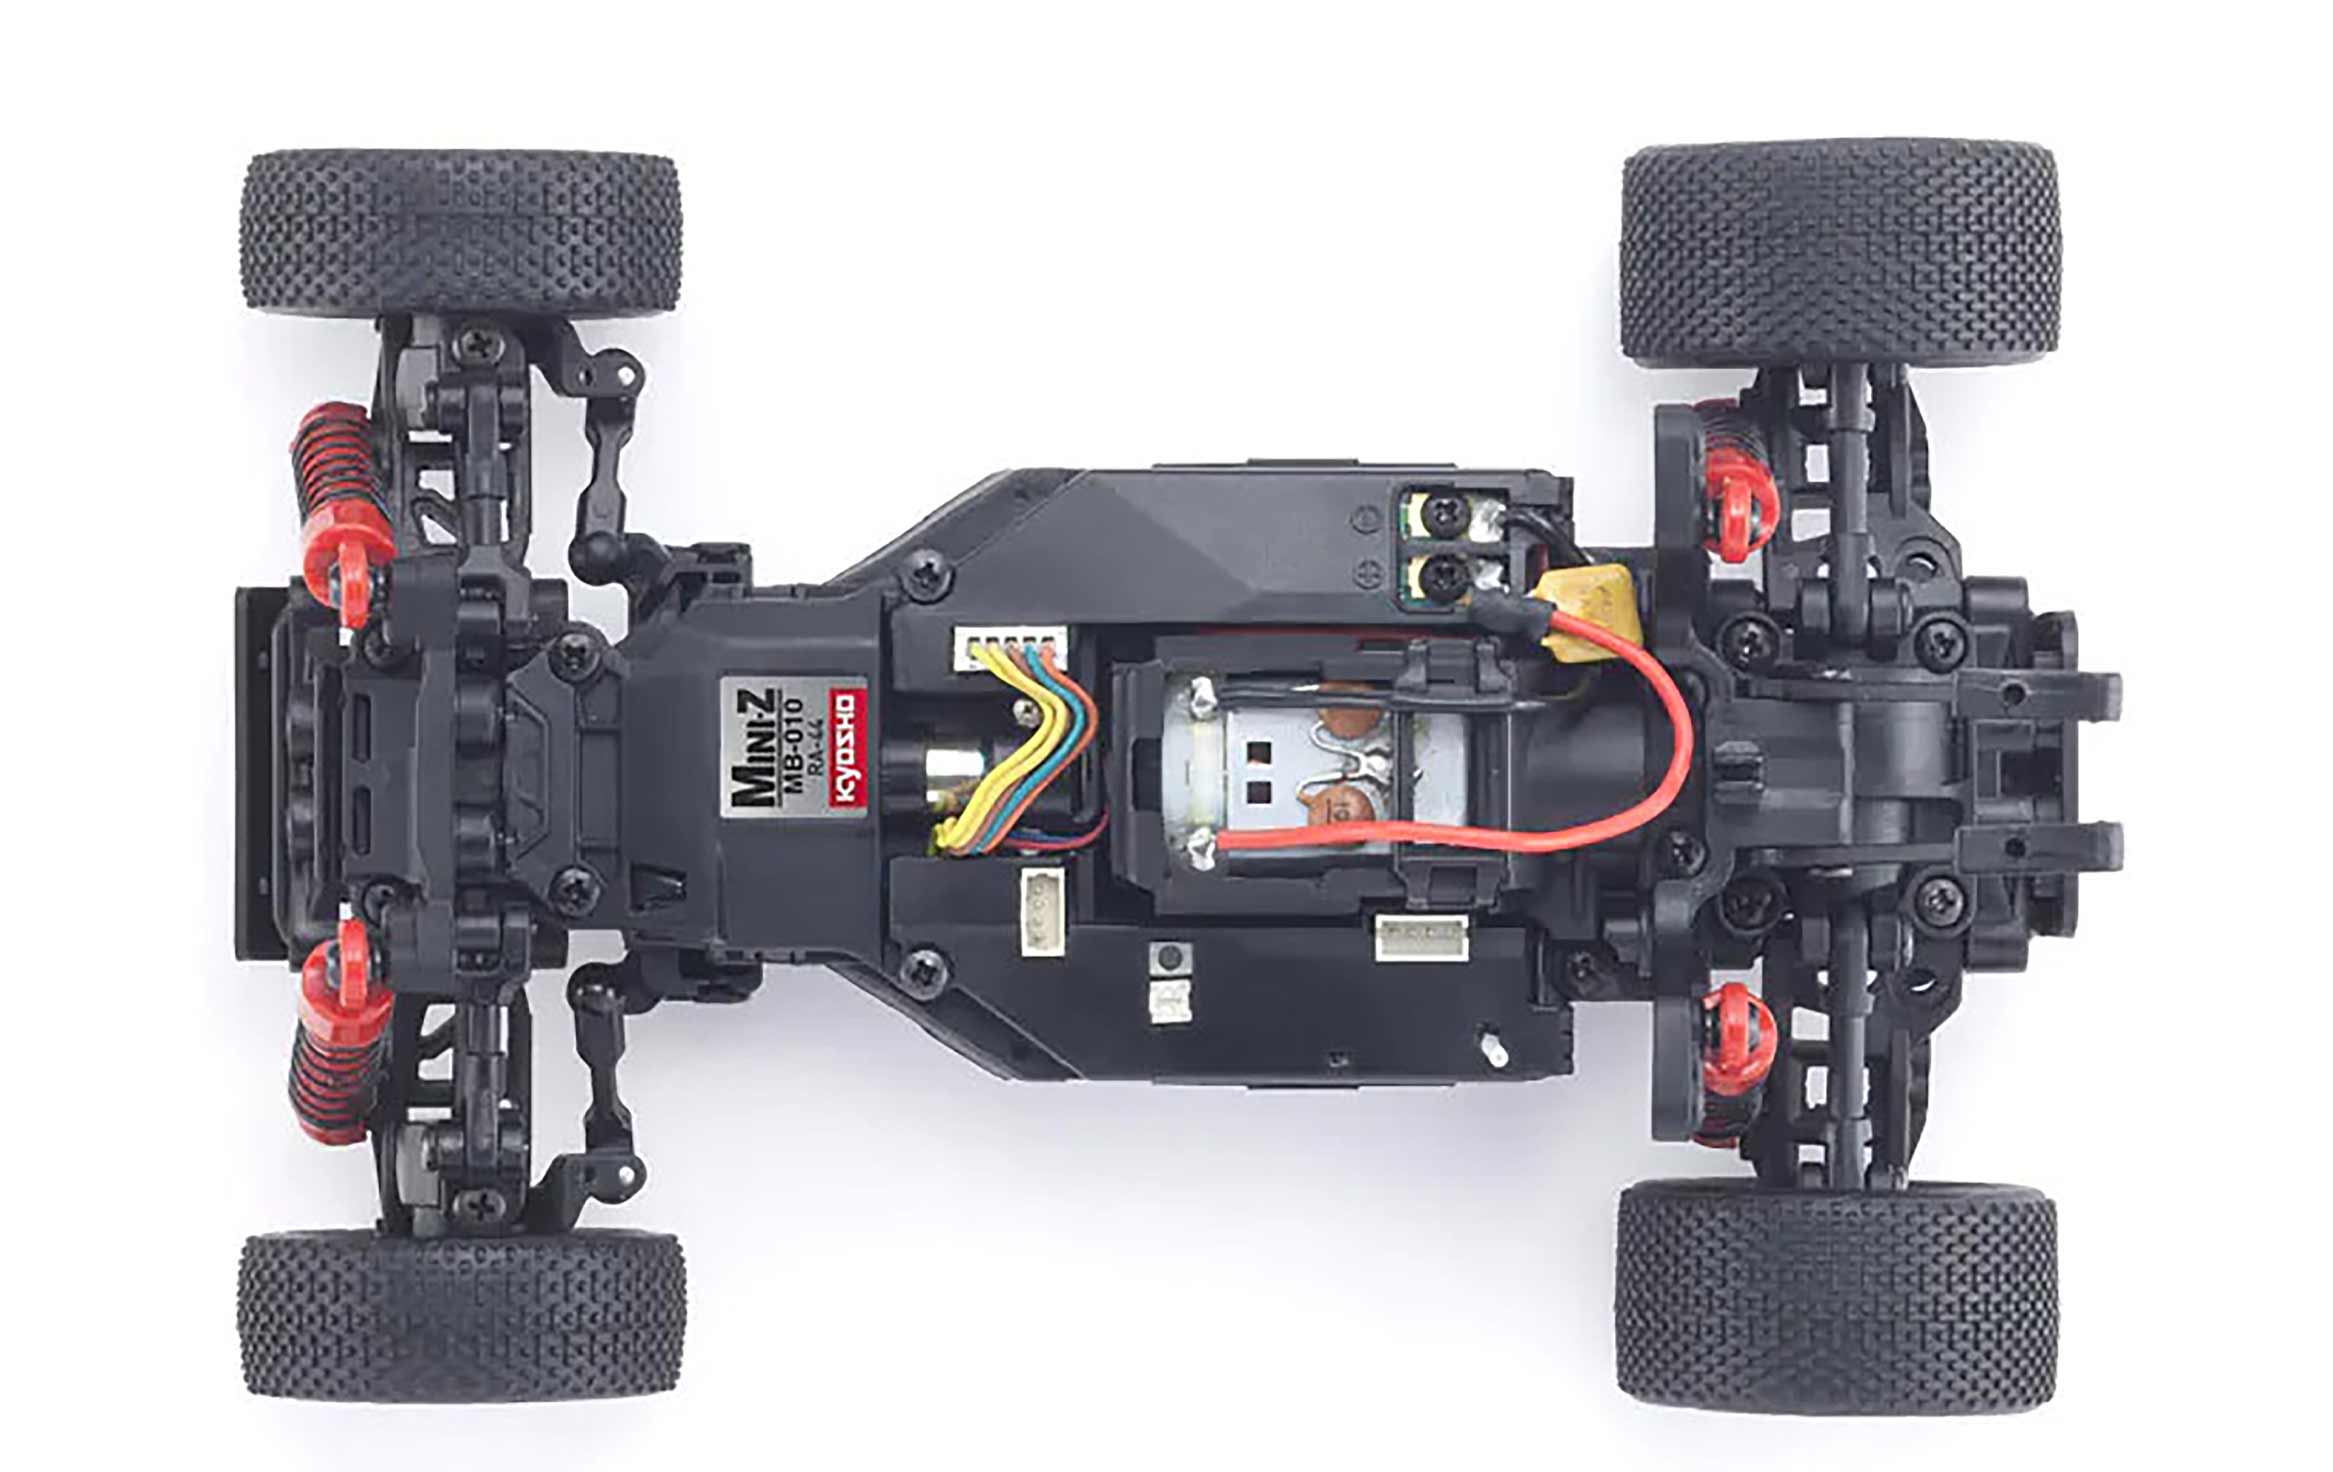 Chassis Features